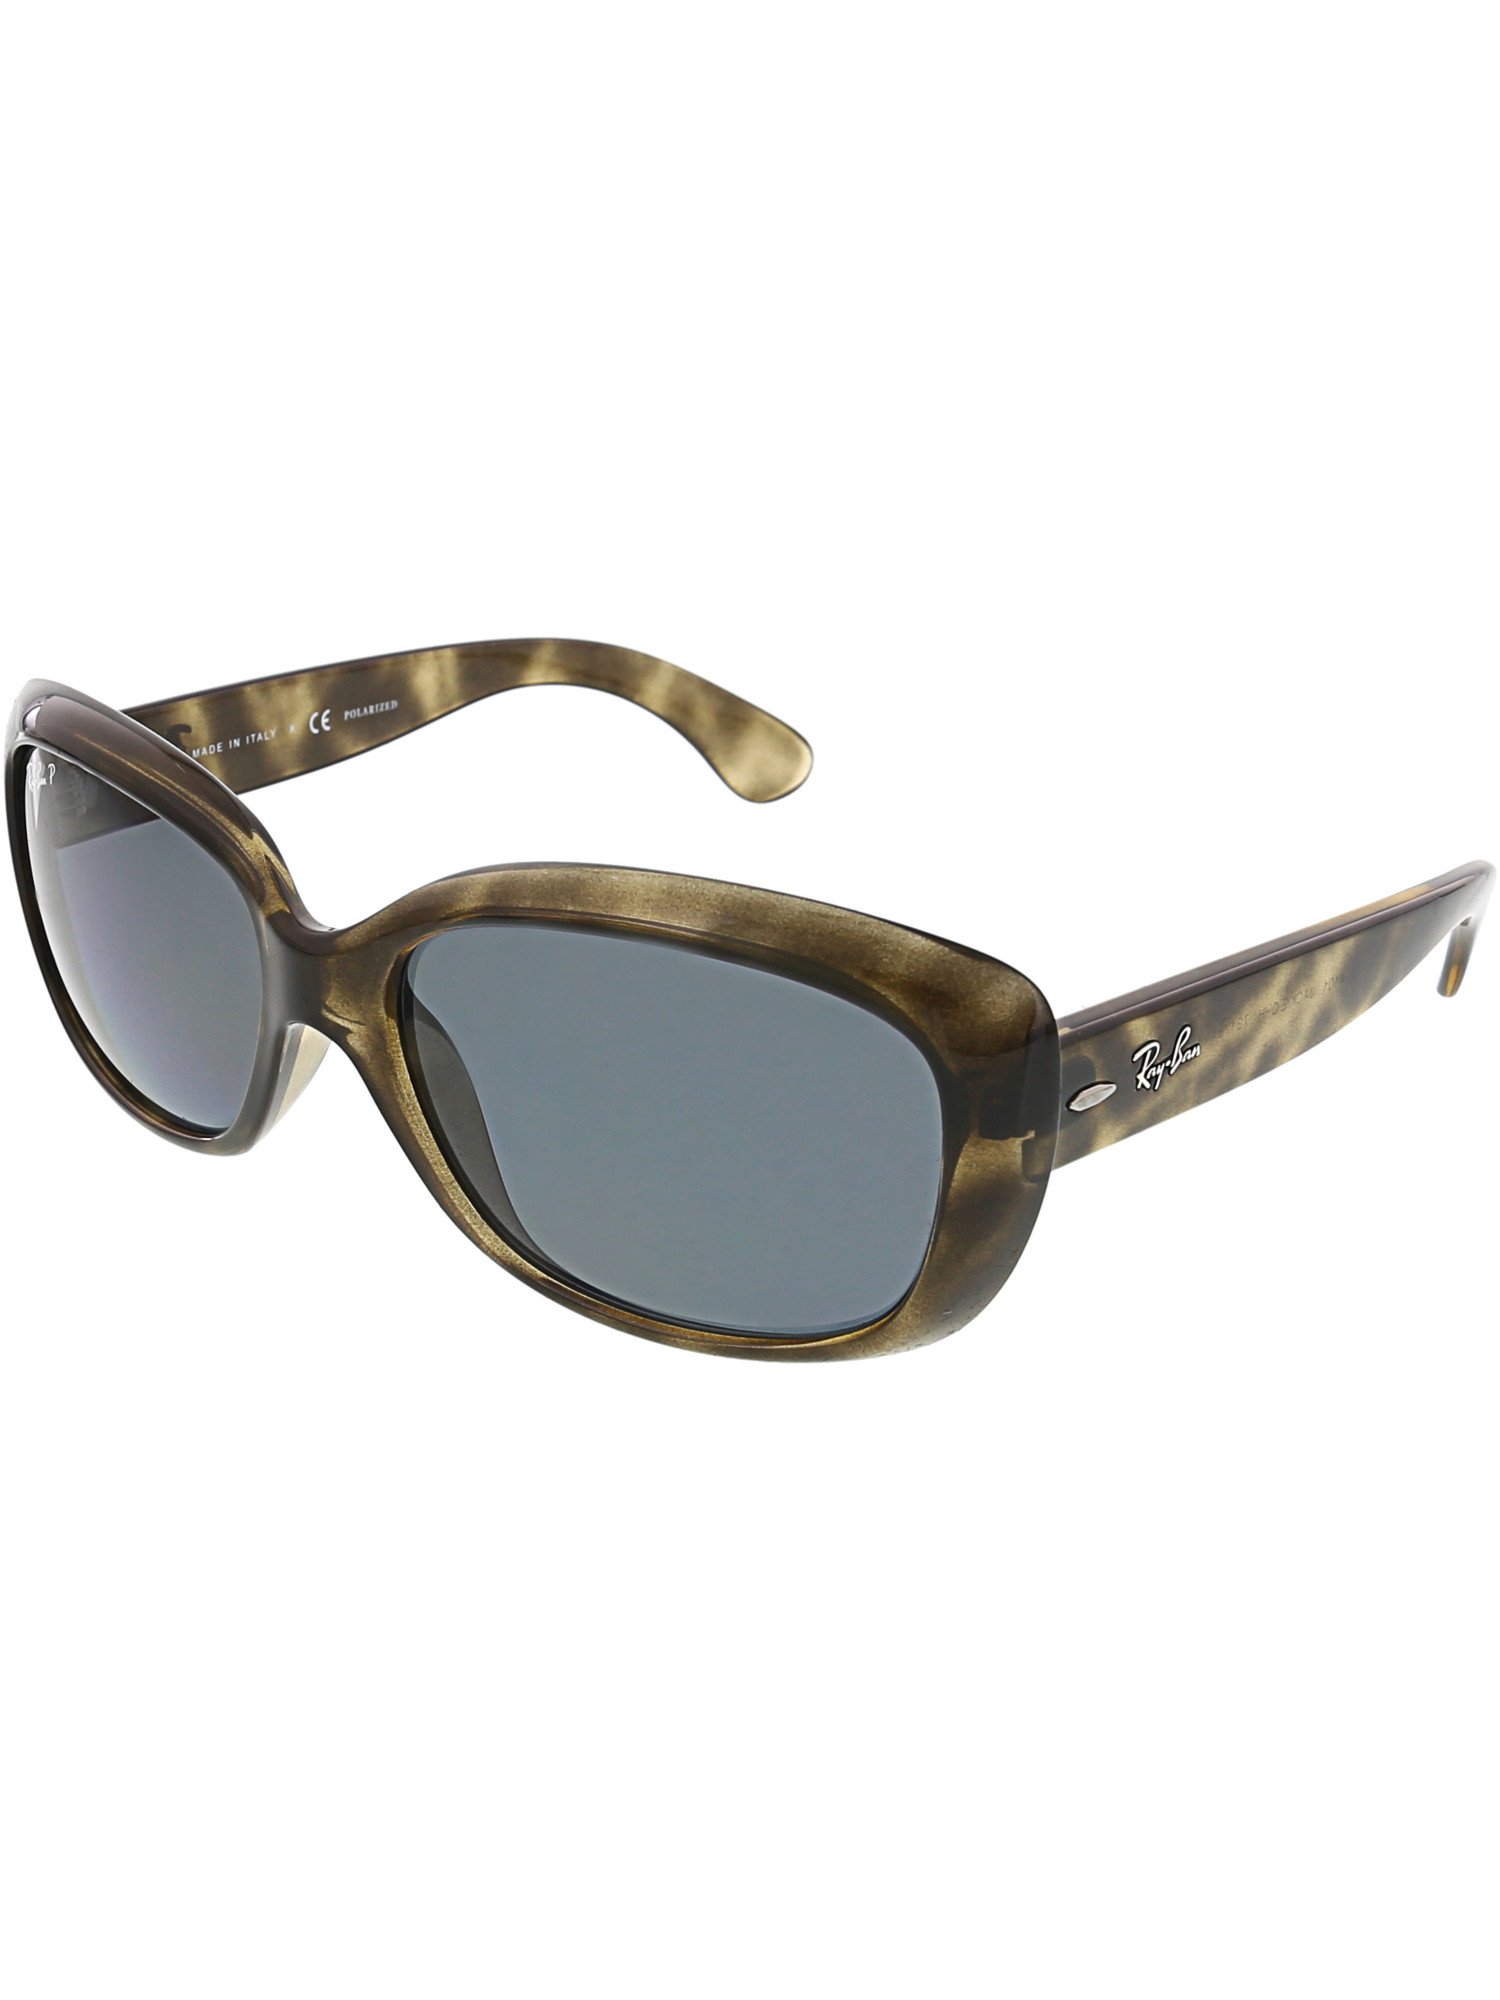 Ray-Ban Women's Polarized Jackie Ohh RB4101-731/81-58 Brown Rectangle Sunglasses - image 1 of 3